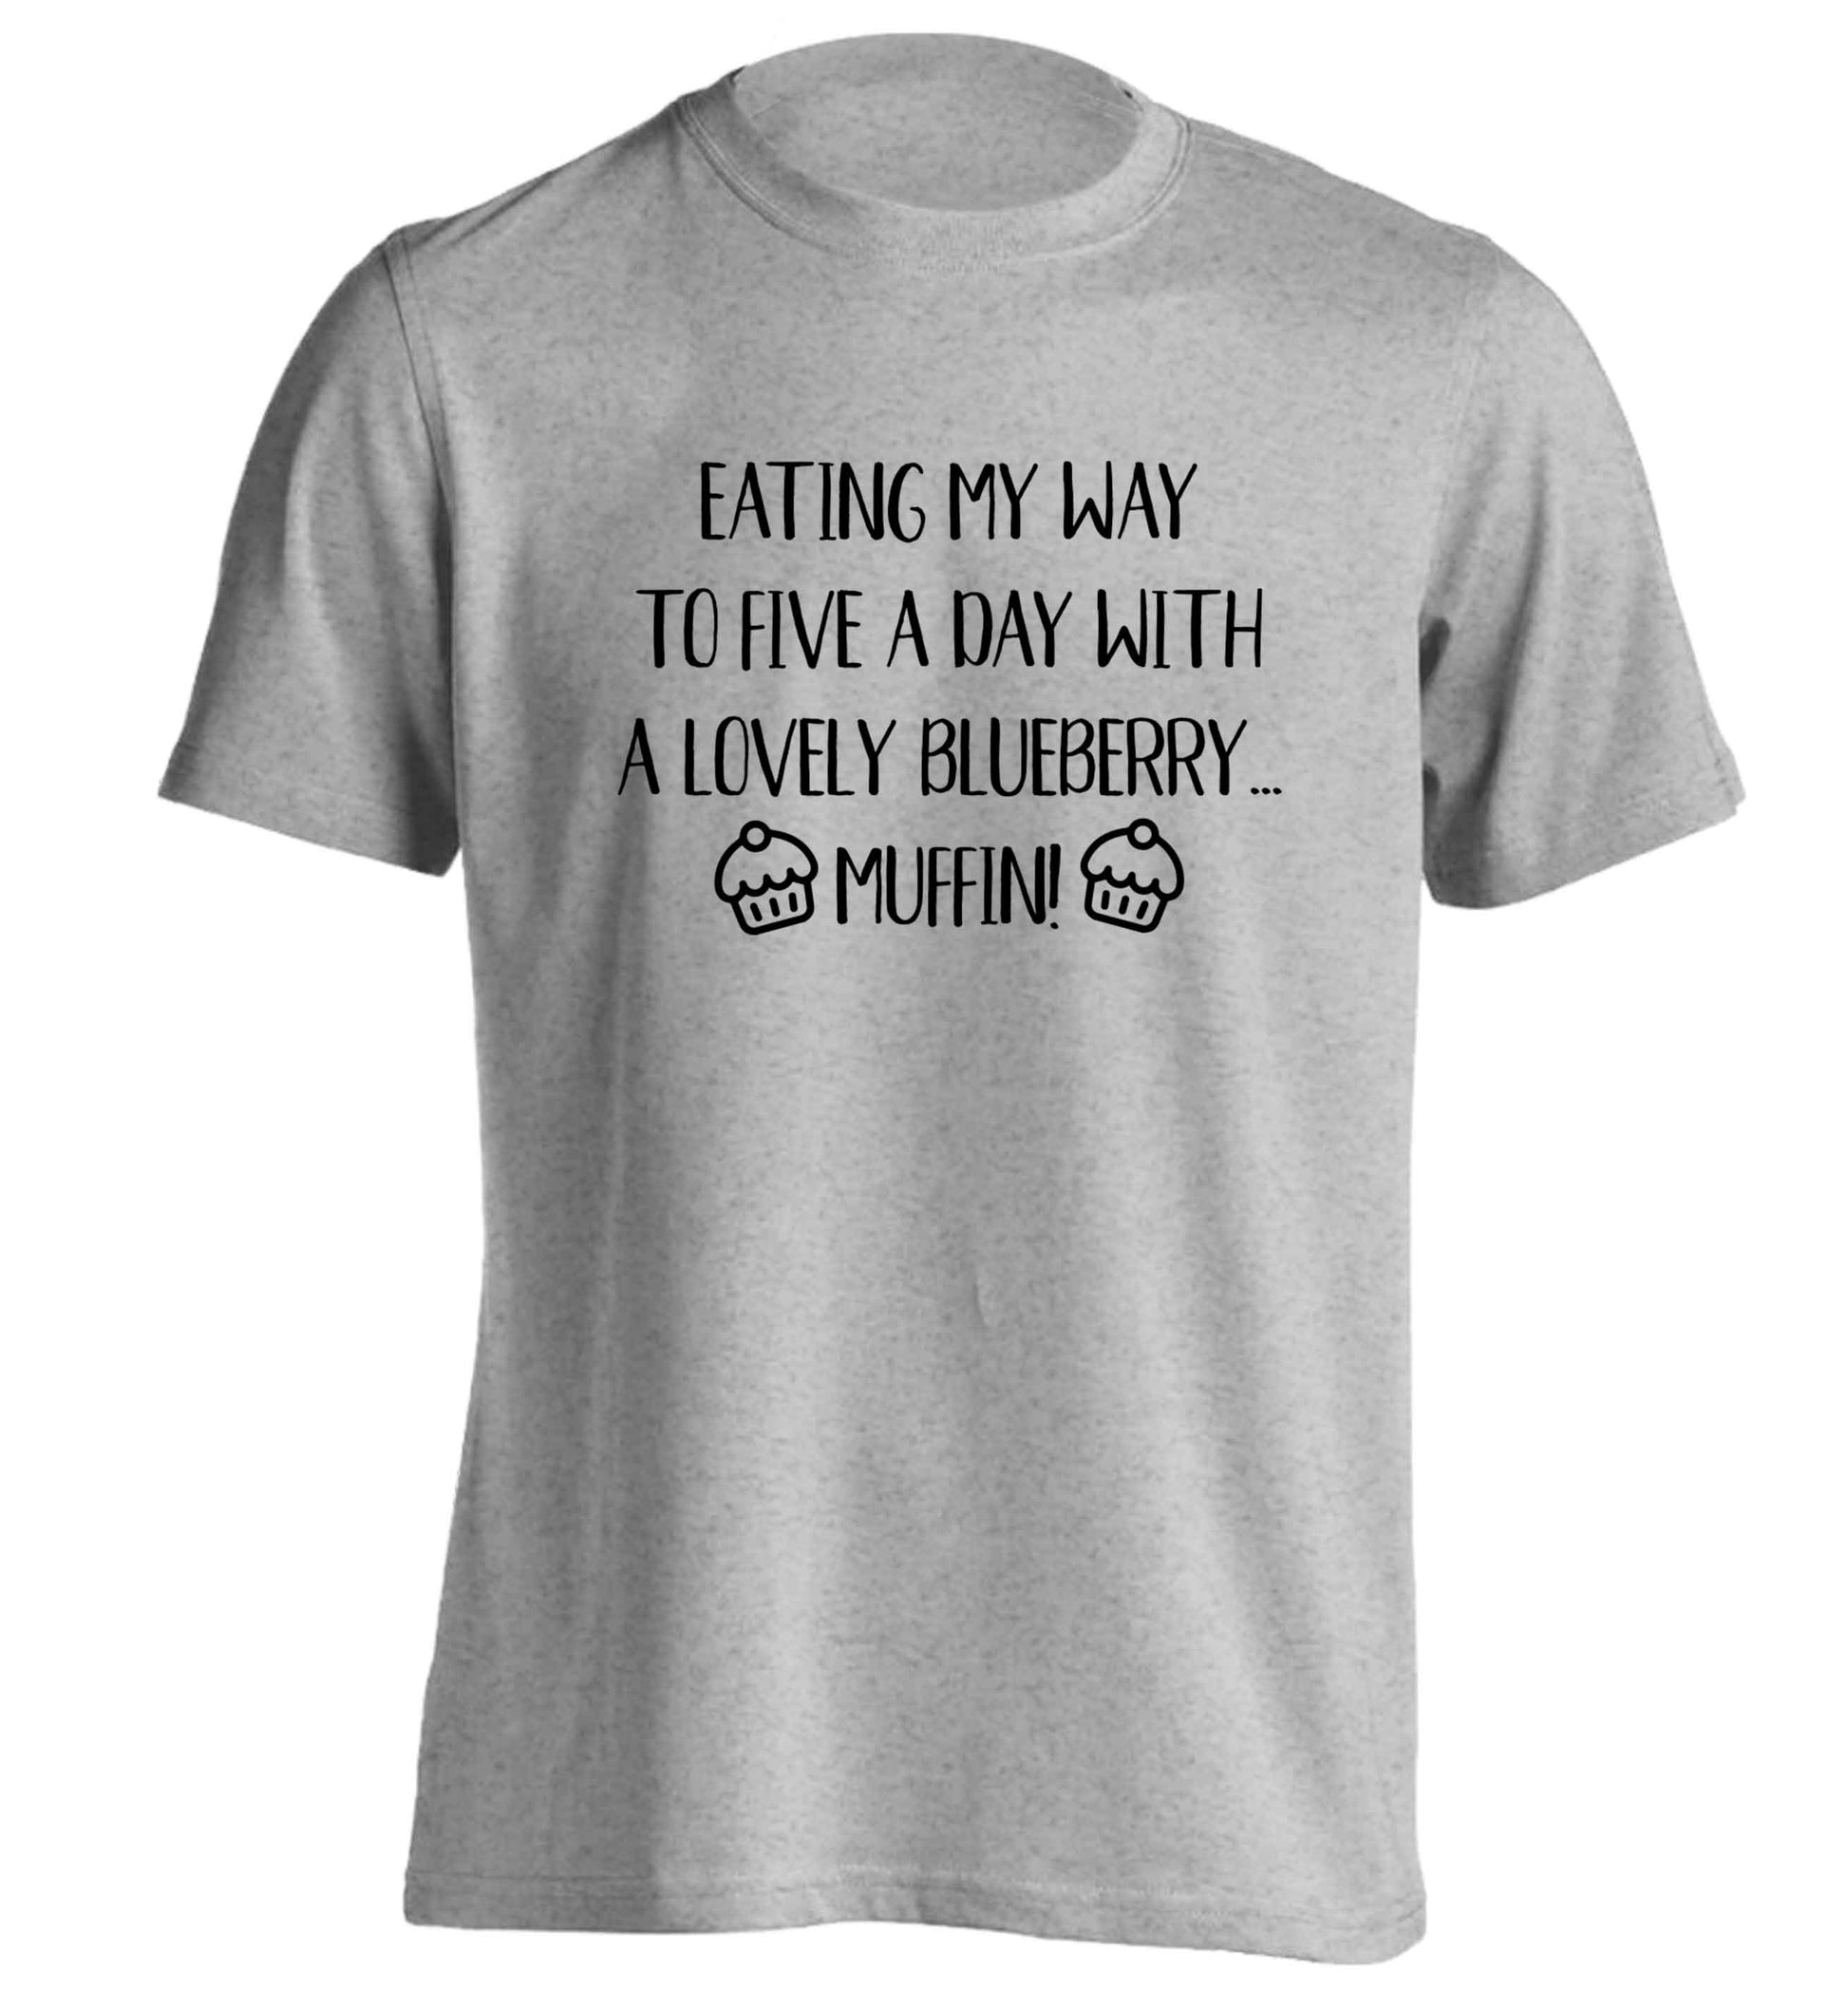 Eating my way to five a day with a lovely blueberry muffin adults unisex grey Tshirt 2XL